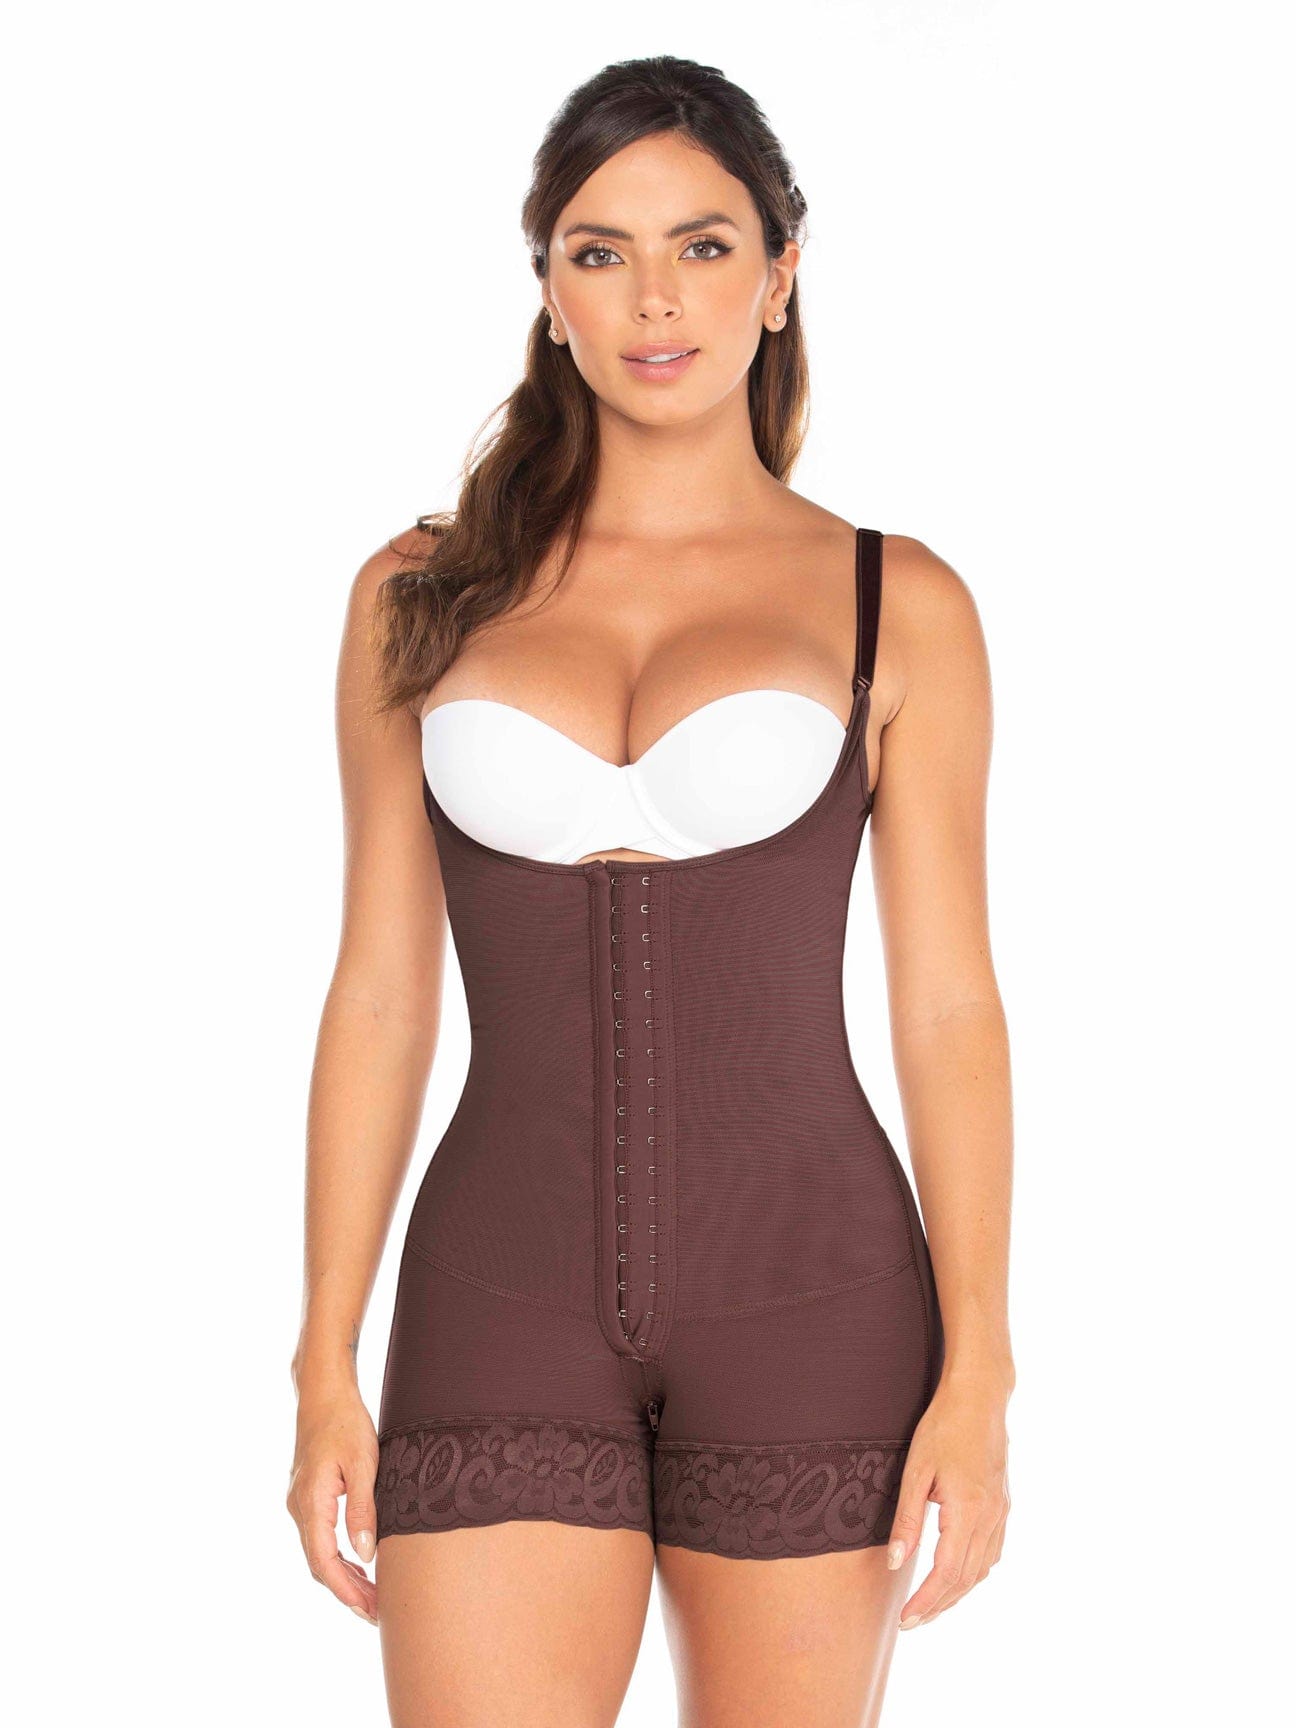 Fajas Colombianas Post Surgery Compression Long Bodysuit Hook And Eupport  Spanx Shapewear Thigh Trimmer Jb5-2